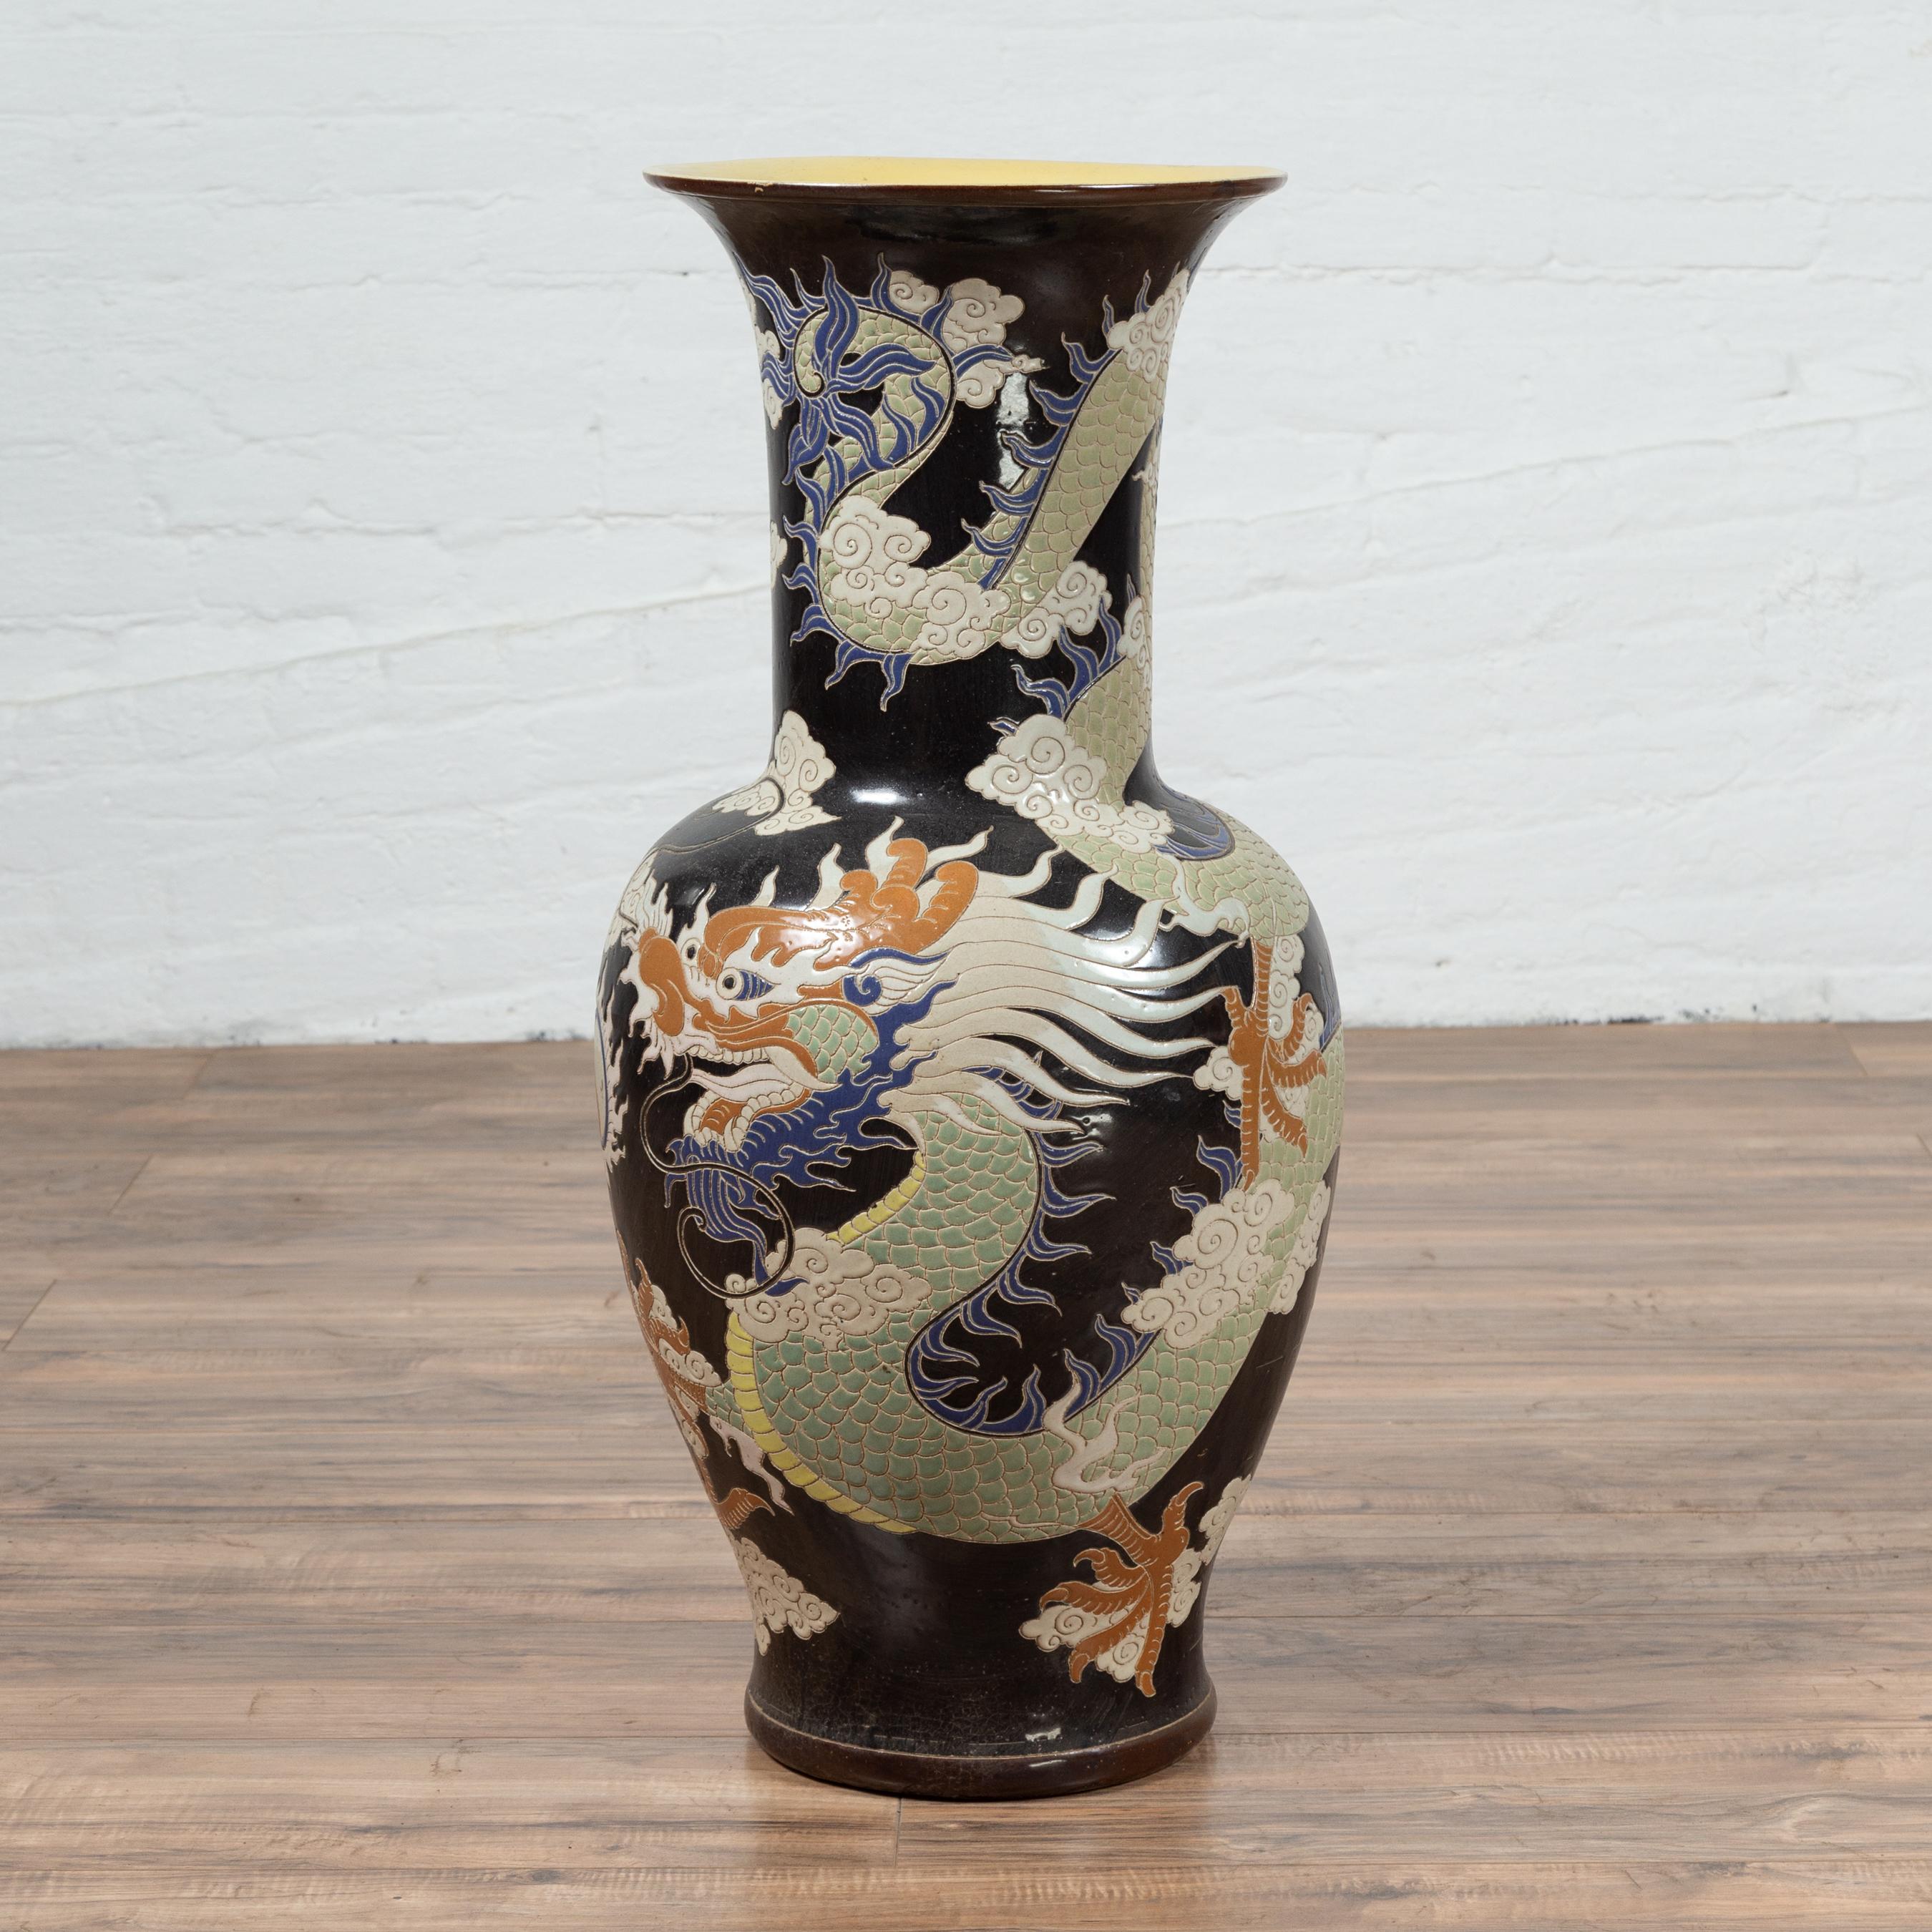 A Vietnamese blue dragon motif contemporary altar vase found in a temple. Charming our eyes with its black ground highlighting the beauty of its blue dragon motif, this large altar vase was found in a Vietnamese temple. Its flaring neck, along with